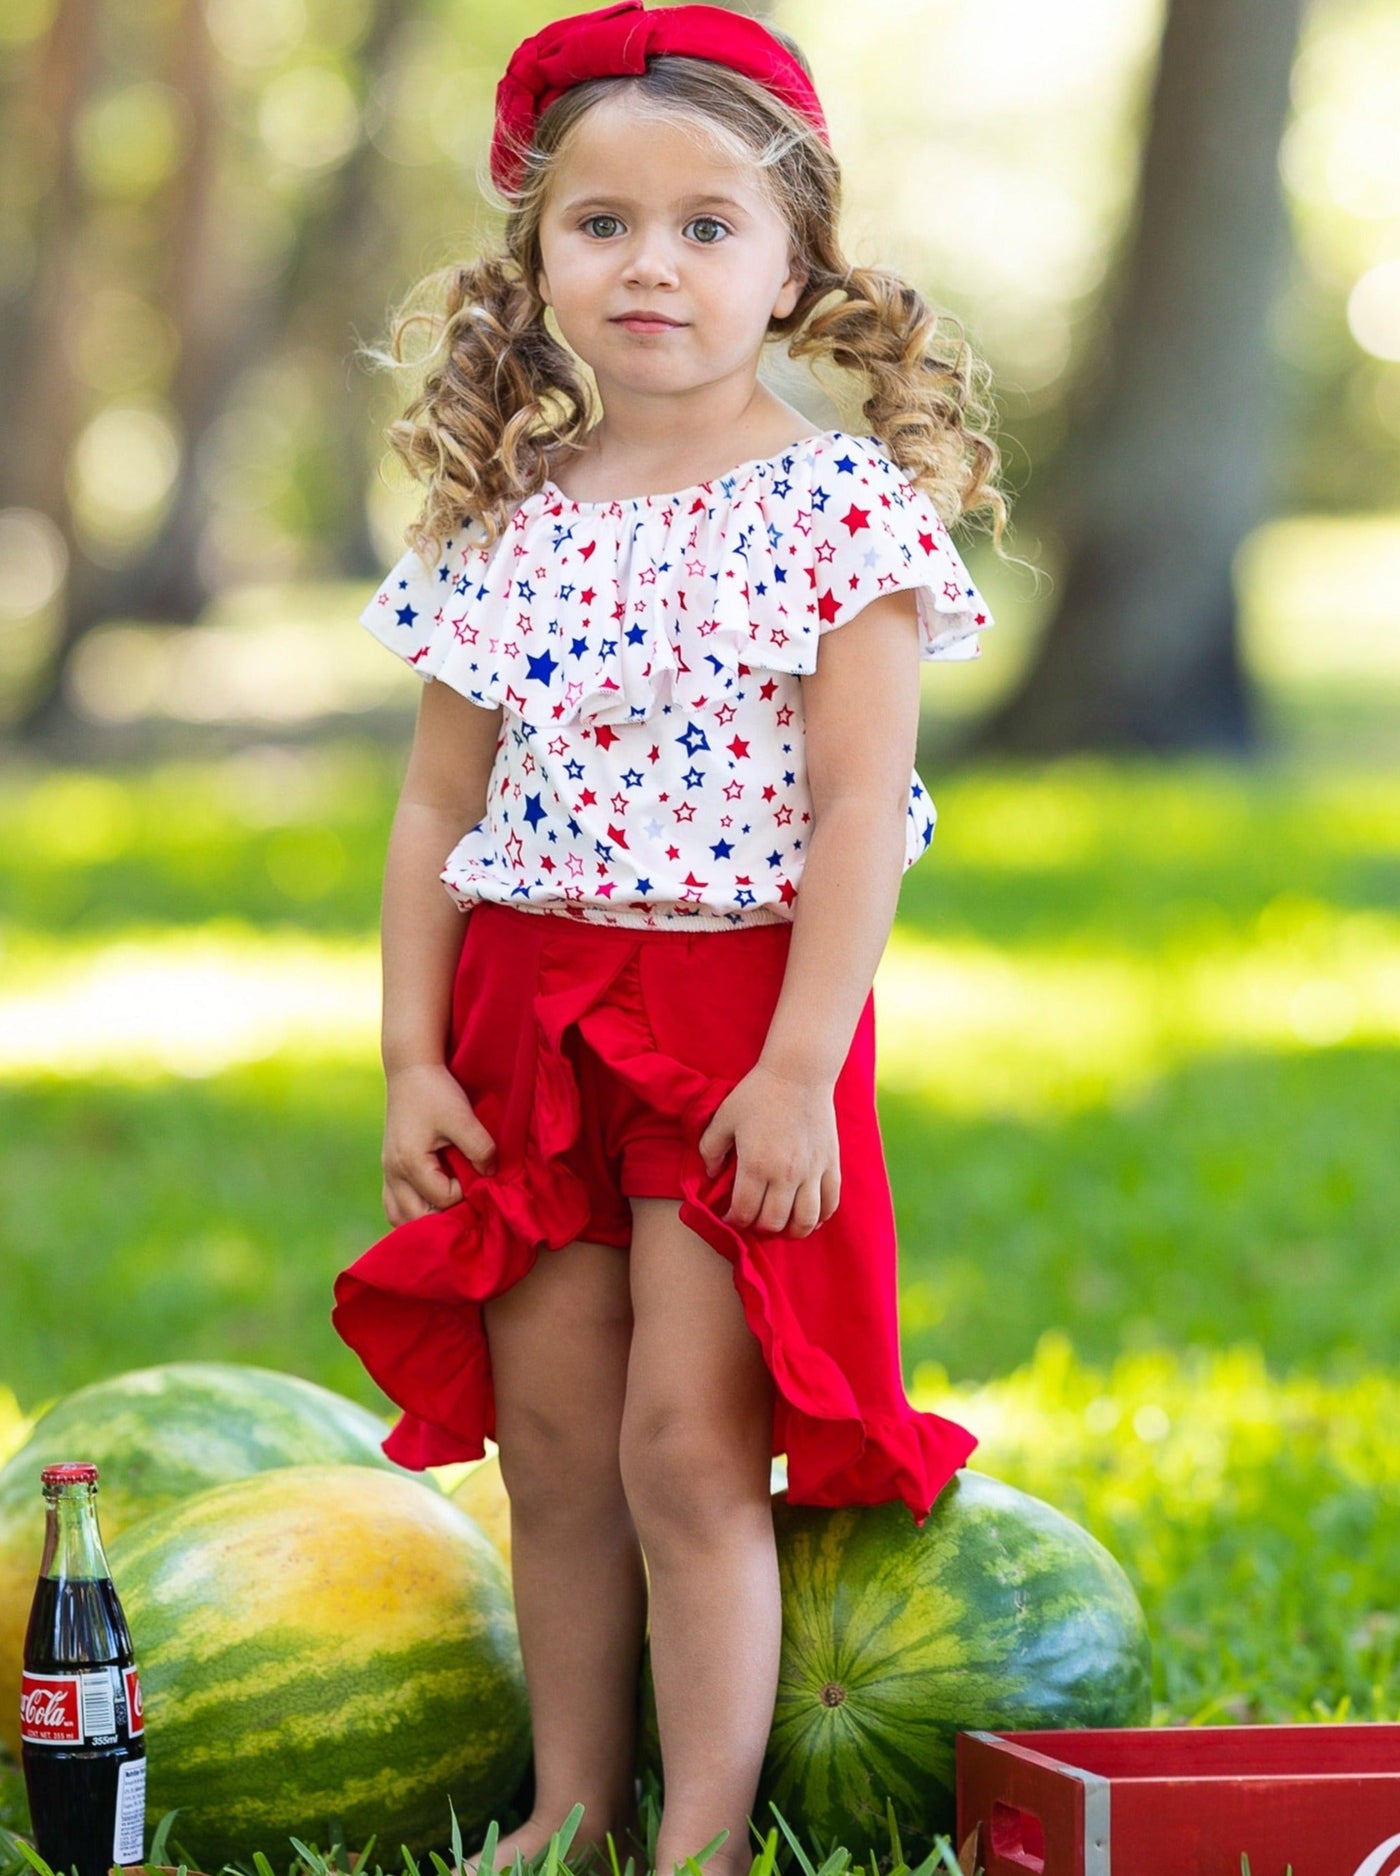 Girls three piece set features a white ruffle top with red and blue star print and red shorts with matching overlay wrap ruffle skirt